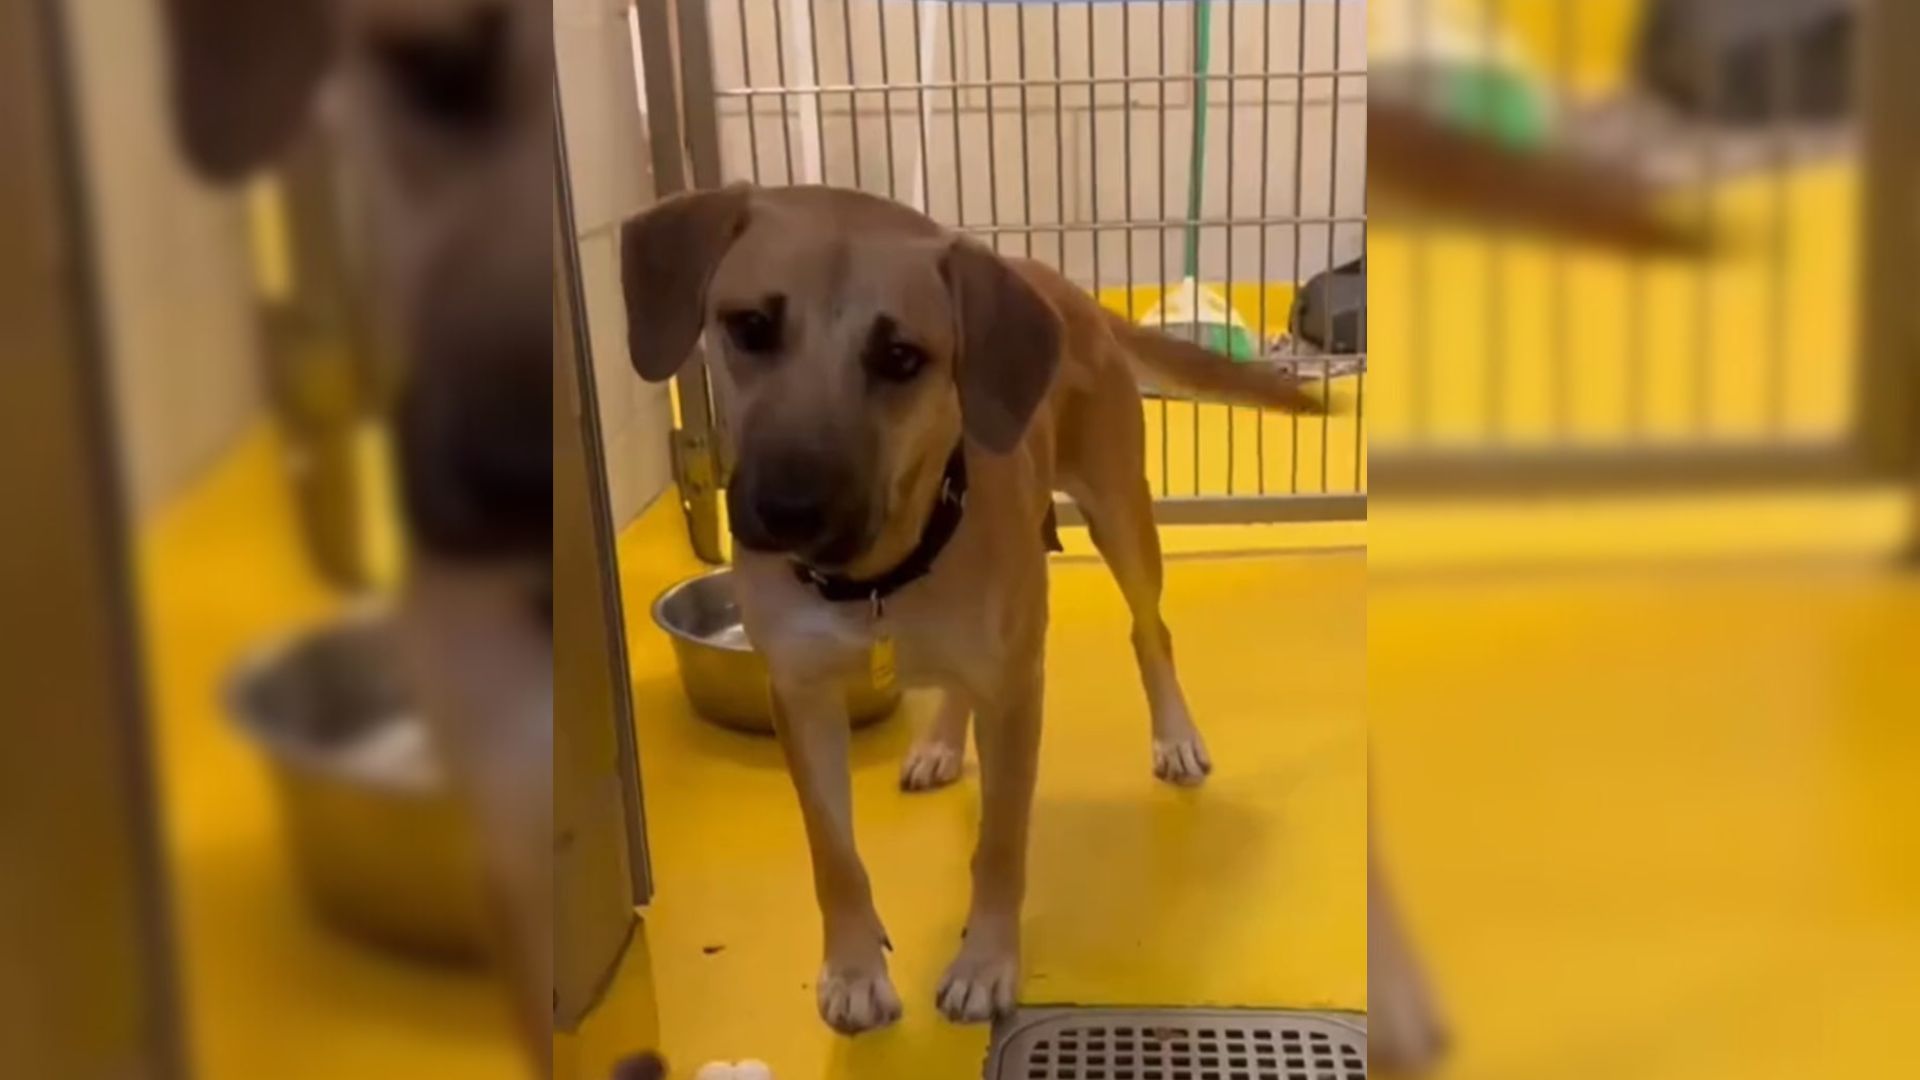 Mama Dog Is Sad When She Realizes All Her Puppies Have Been Adopted But She Still Hasn’t Found A Home